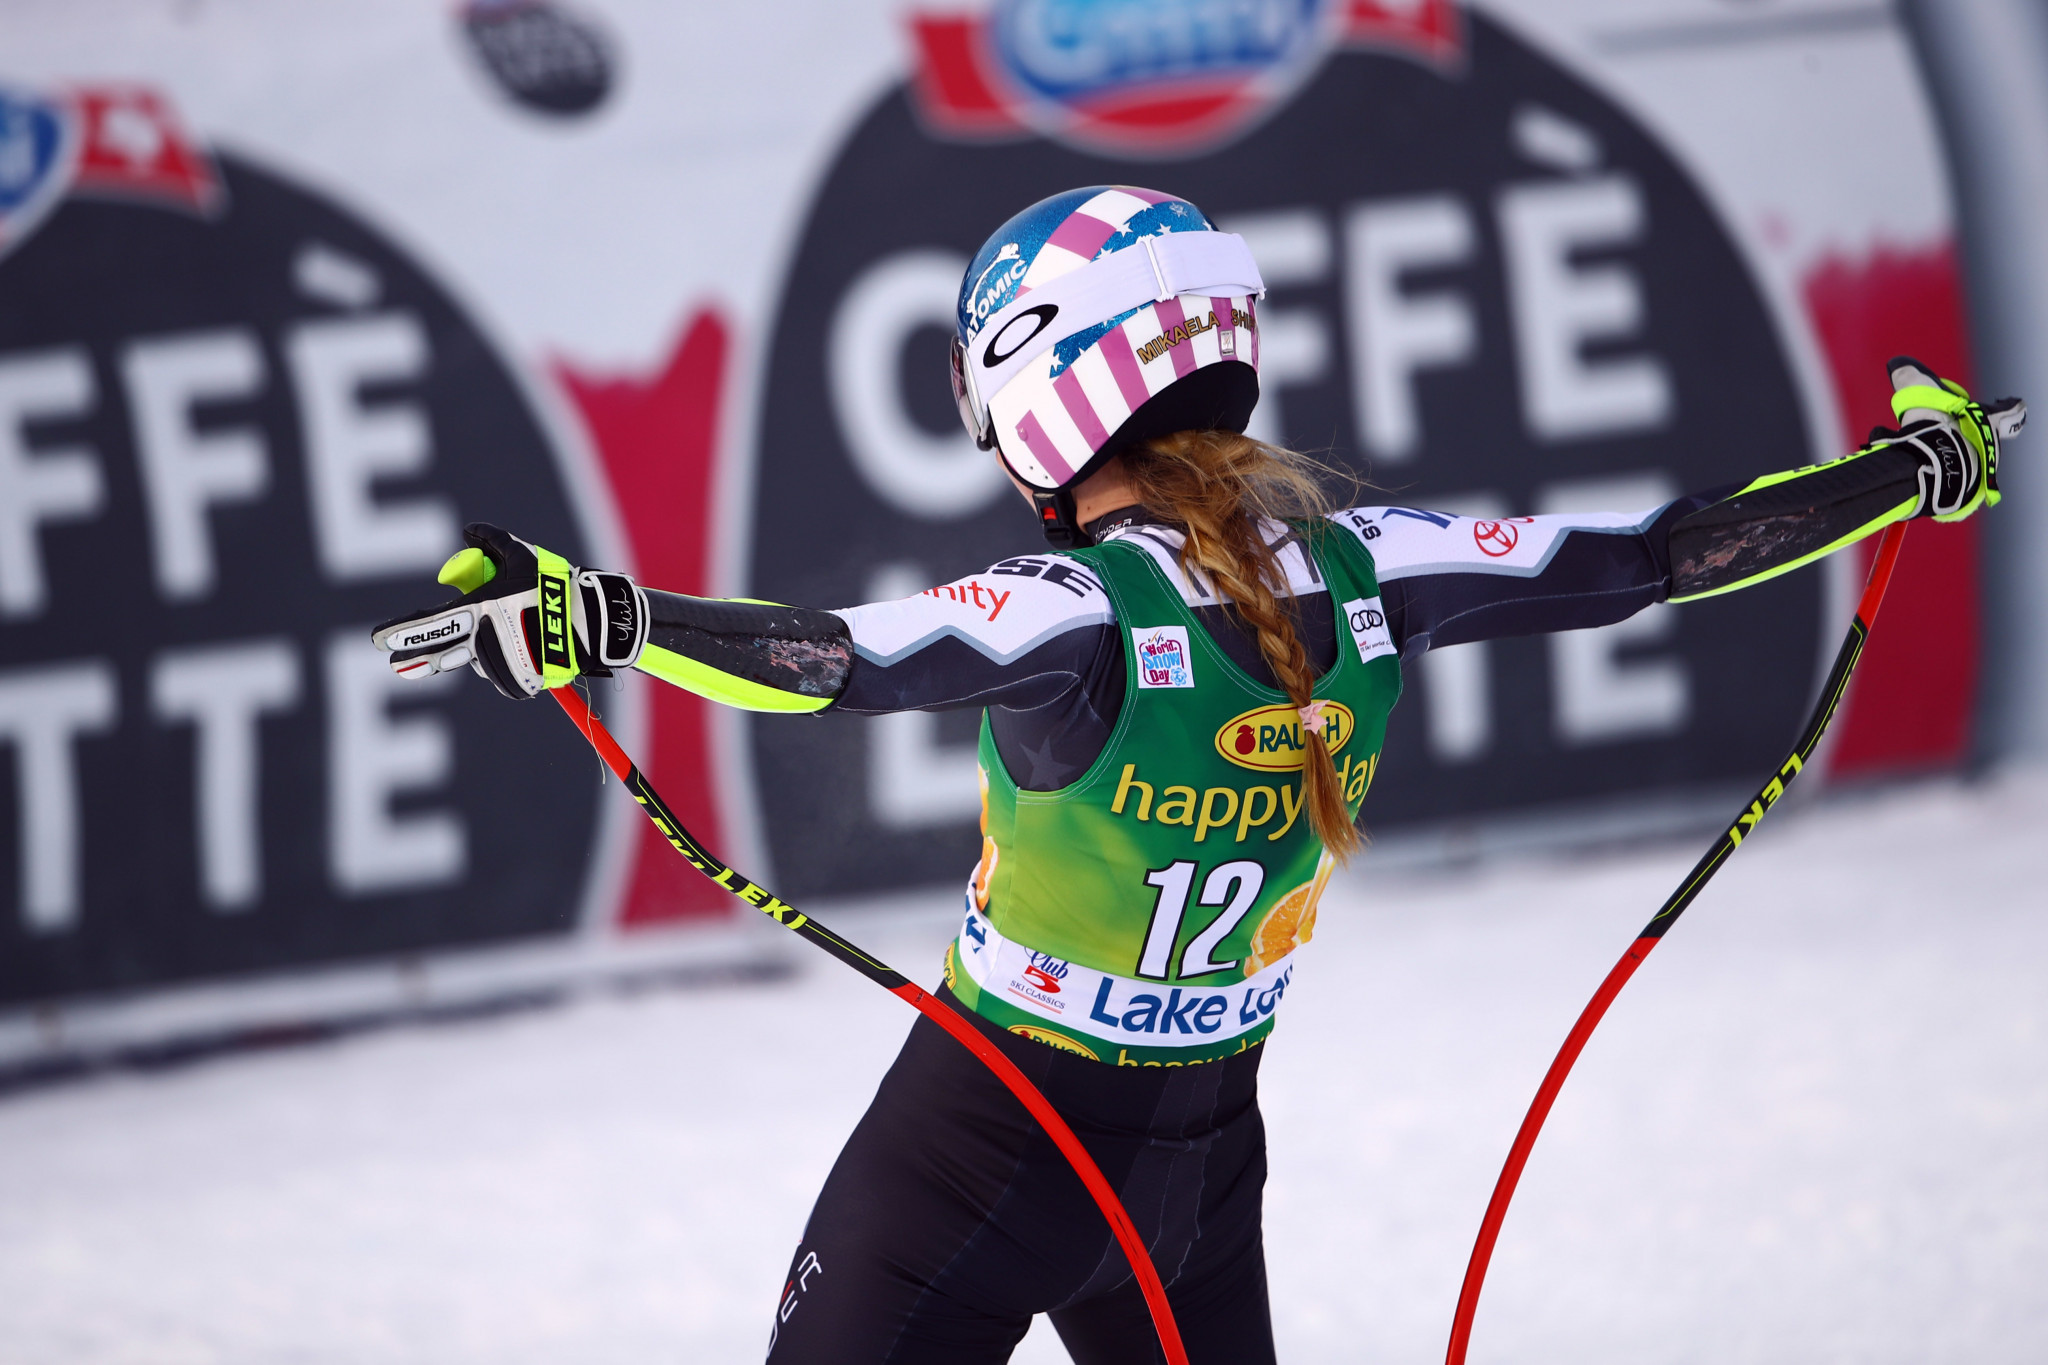 Shiffrin skis into elite club with maiden Alpine Skiing World Cup super-G success